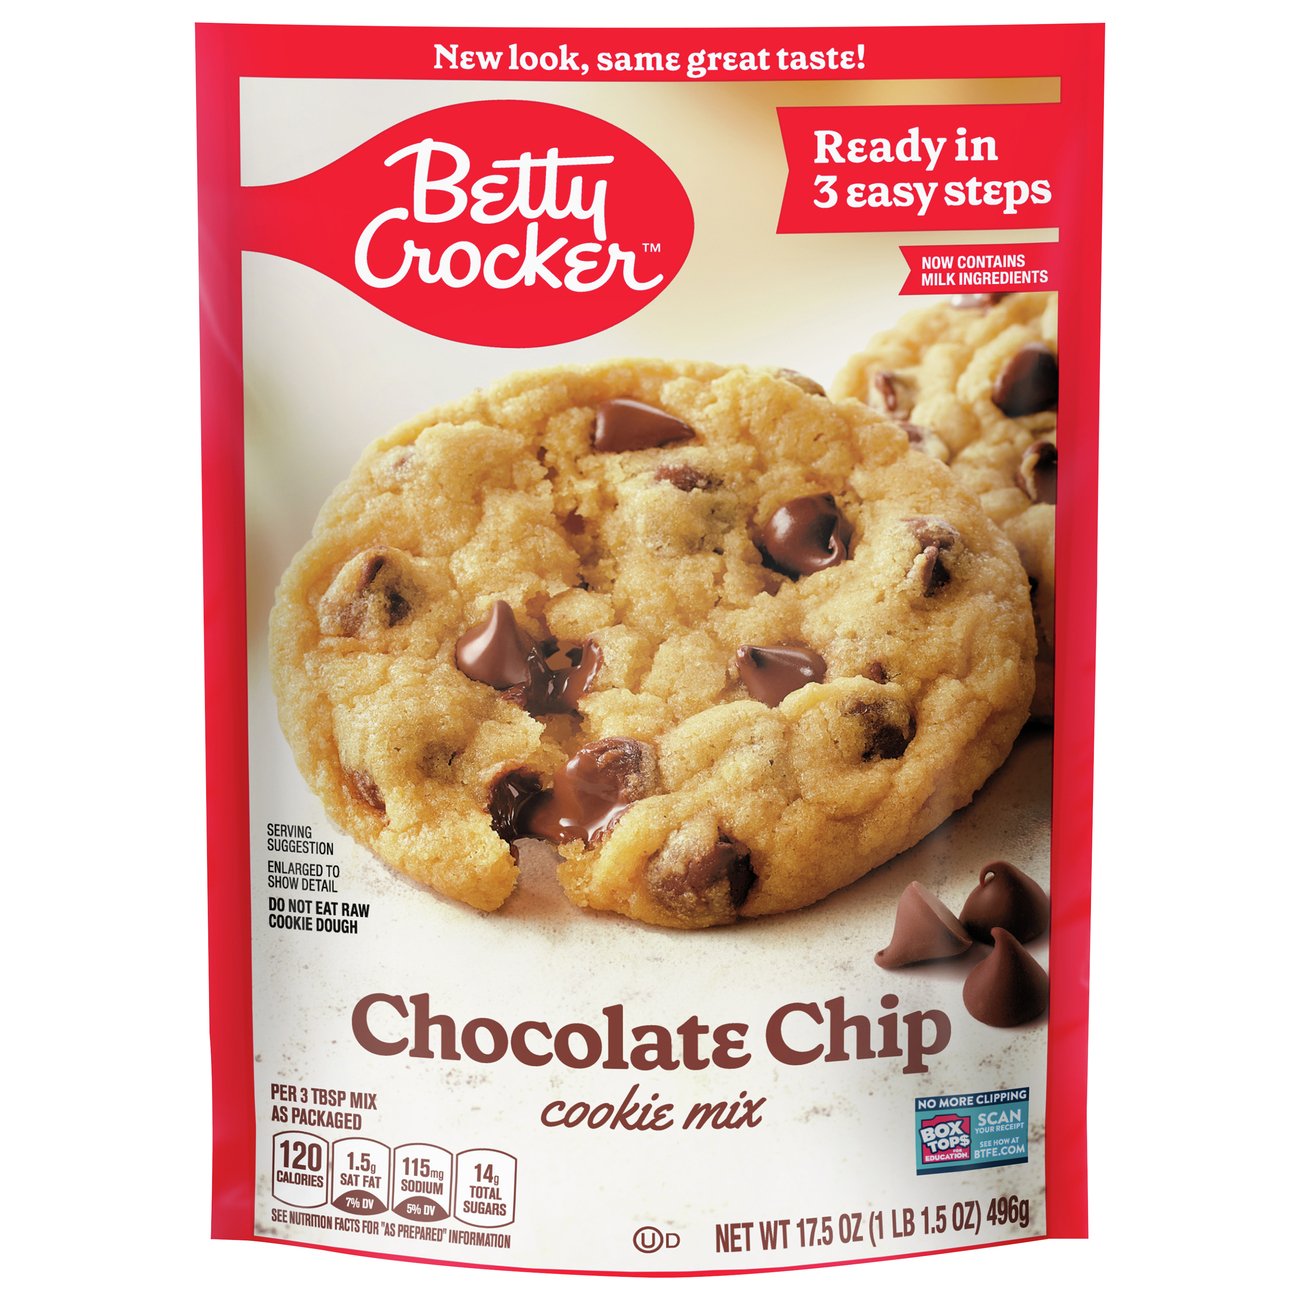 Betty Crocker Chocolate Chip Cookie Mix - Ingredients at